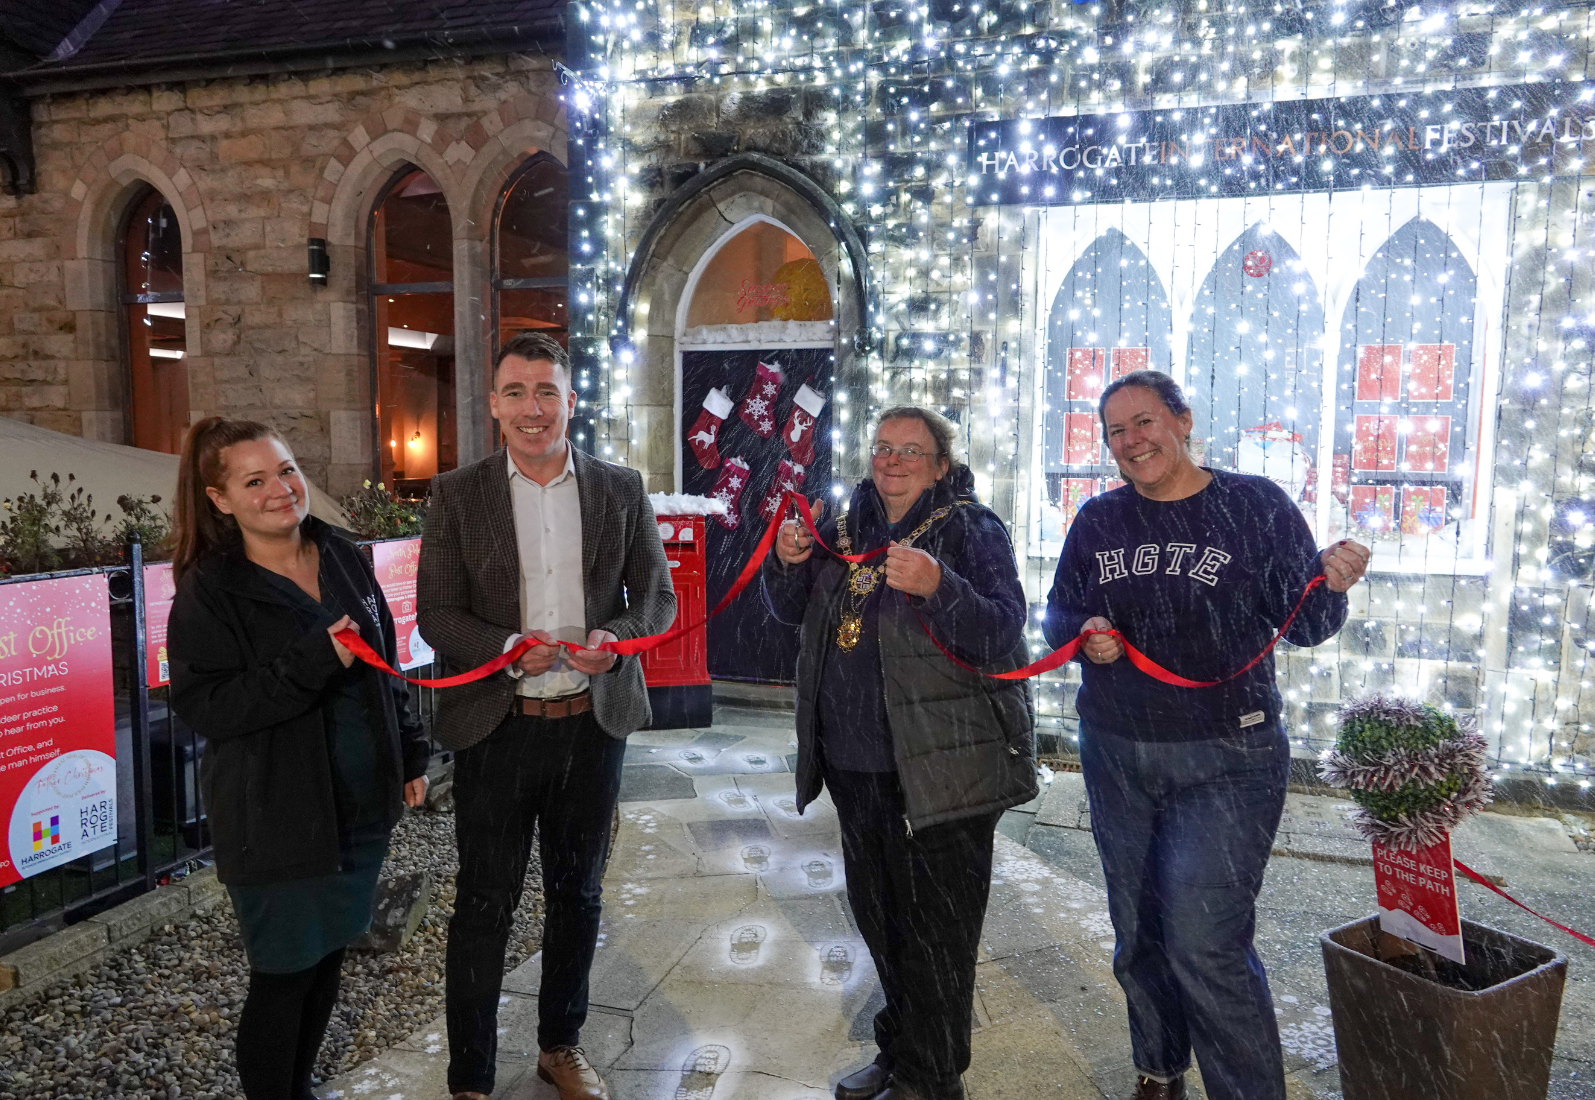 Opening of the North Pole Post Office at Harrogate International Festivals